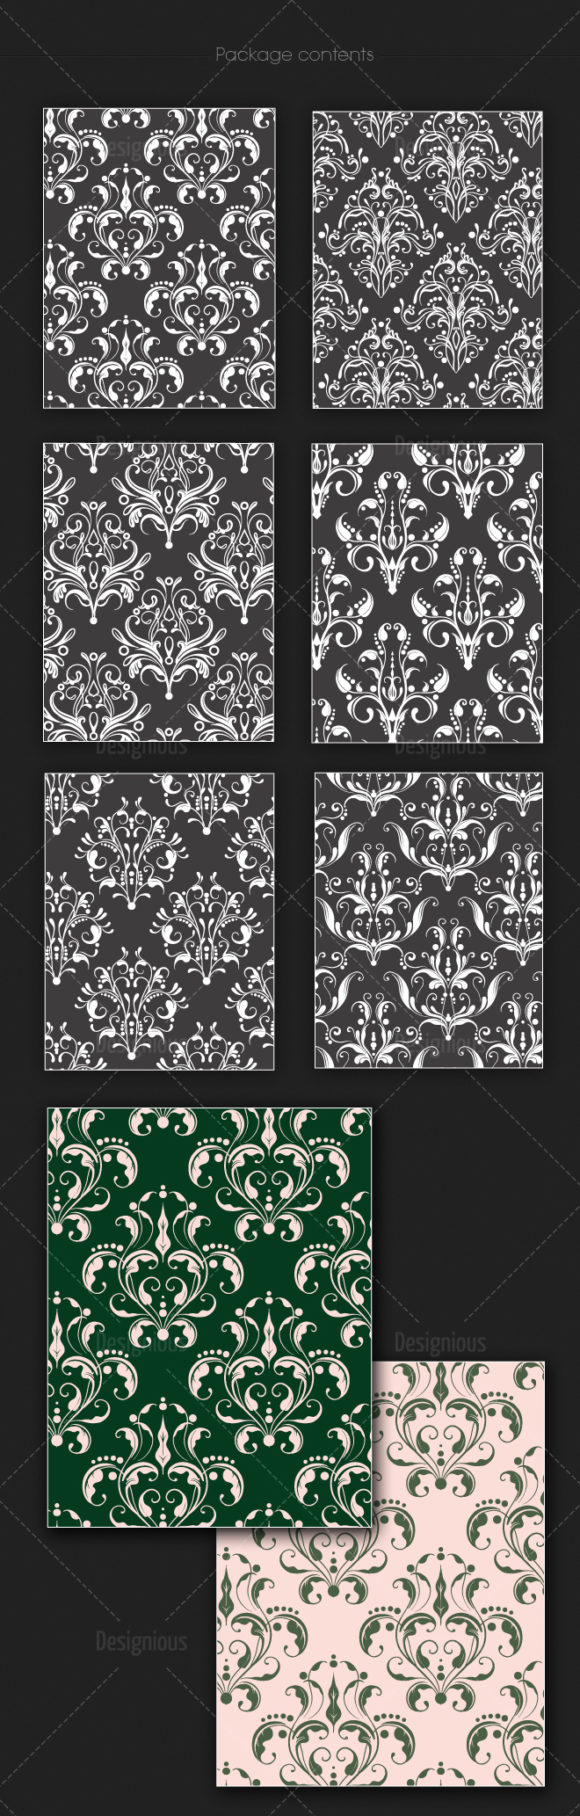 Seamless Patterns Vector Pack 131 2